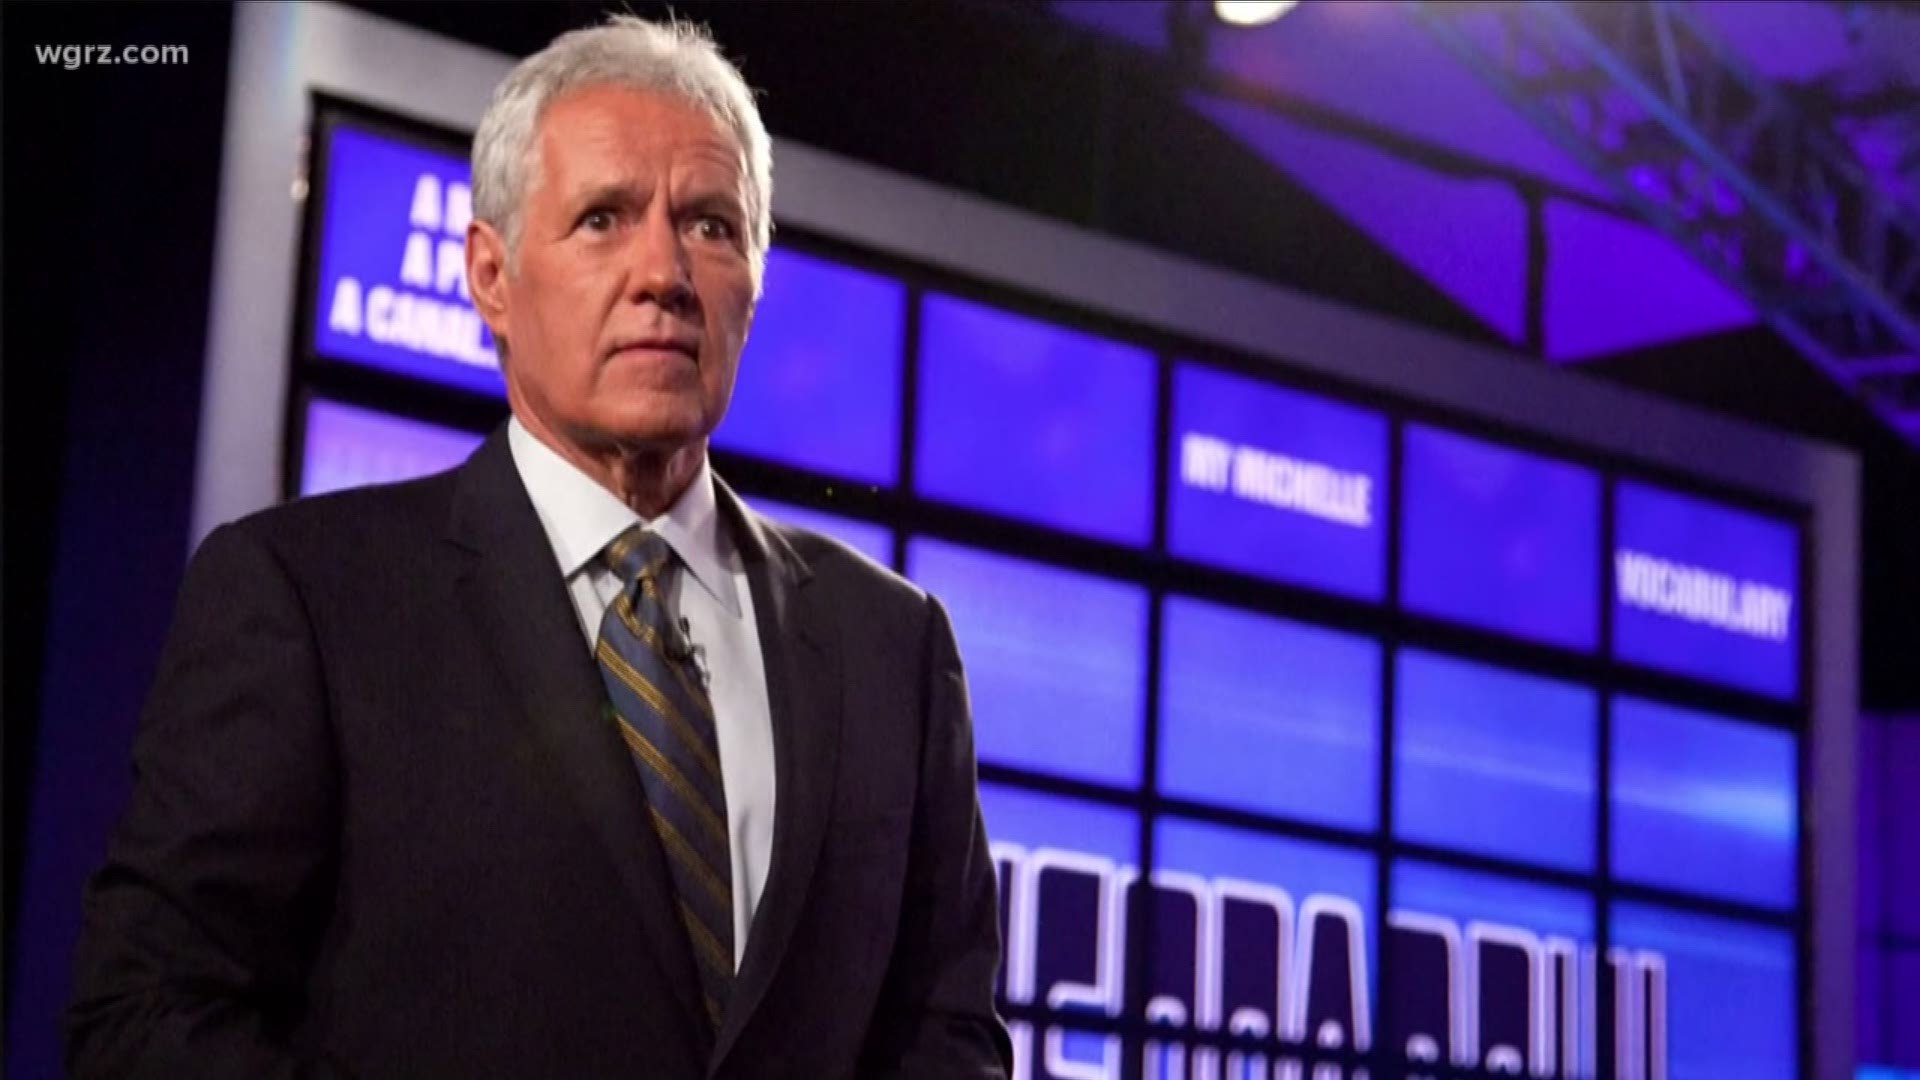 Alex Trebek was diagnosed with stage 4 pancreatic cancer